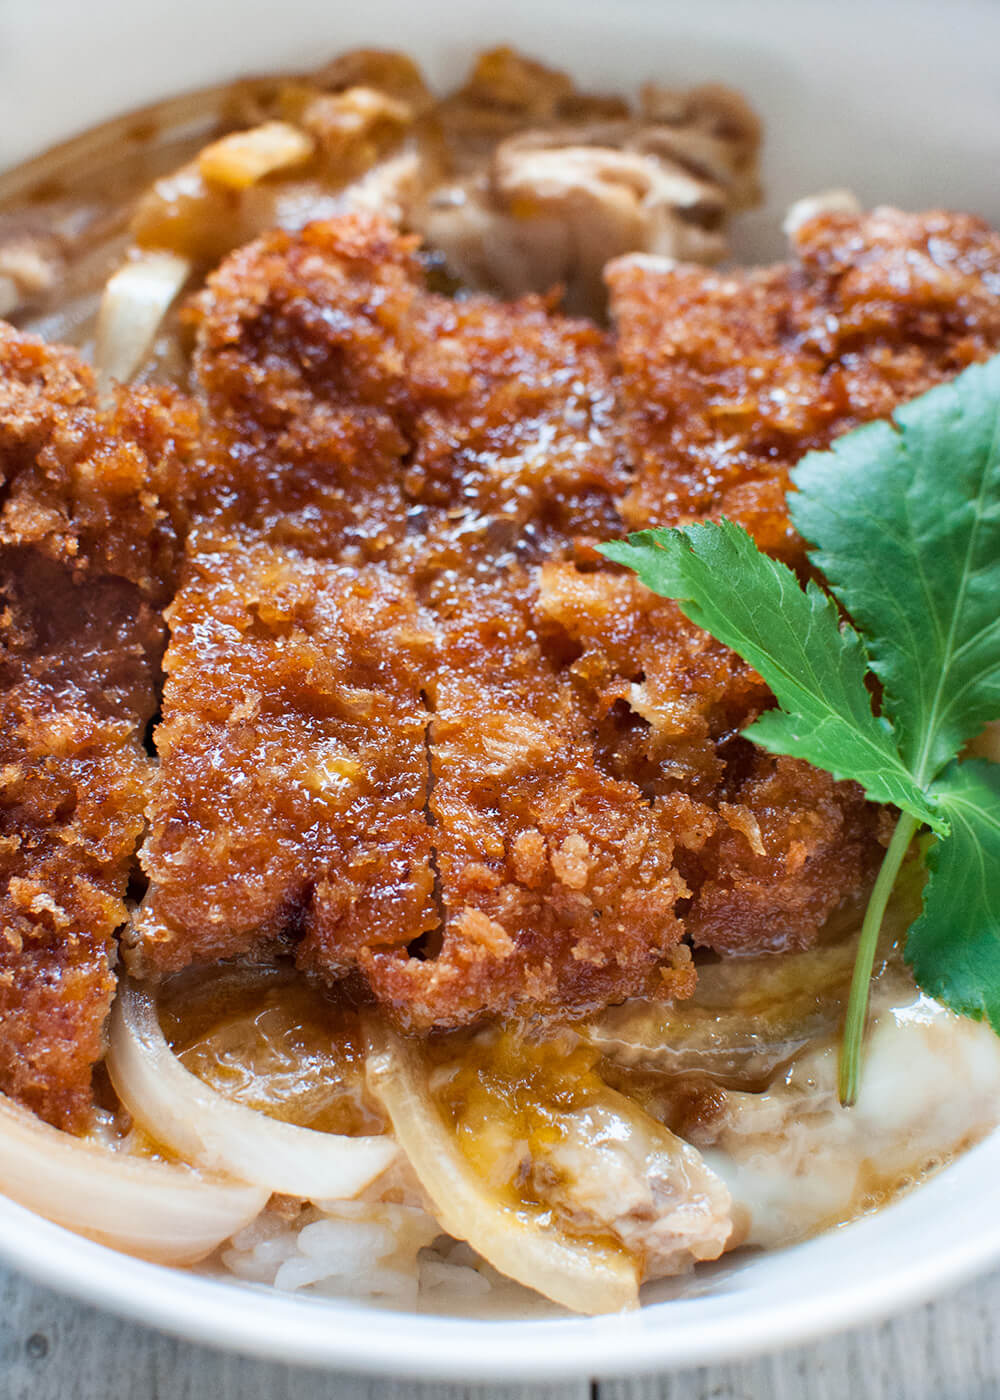 Katsu-don (カツ丼), is a very filling main dish. A bowl of rice topped with tonkatsu (deep fried crumbed pork cutlet), onion and beaten egg, cooked in dashi with sweet soy sauce.